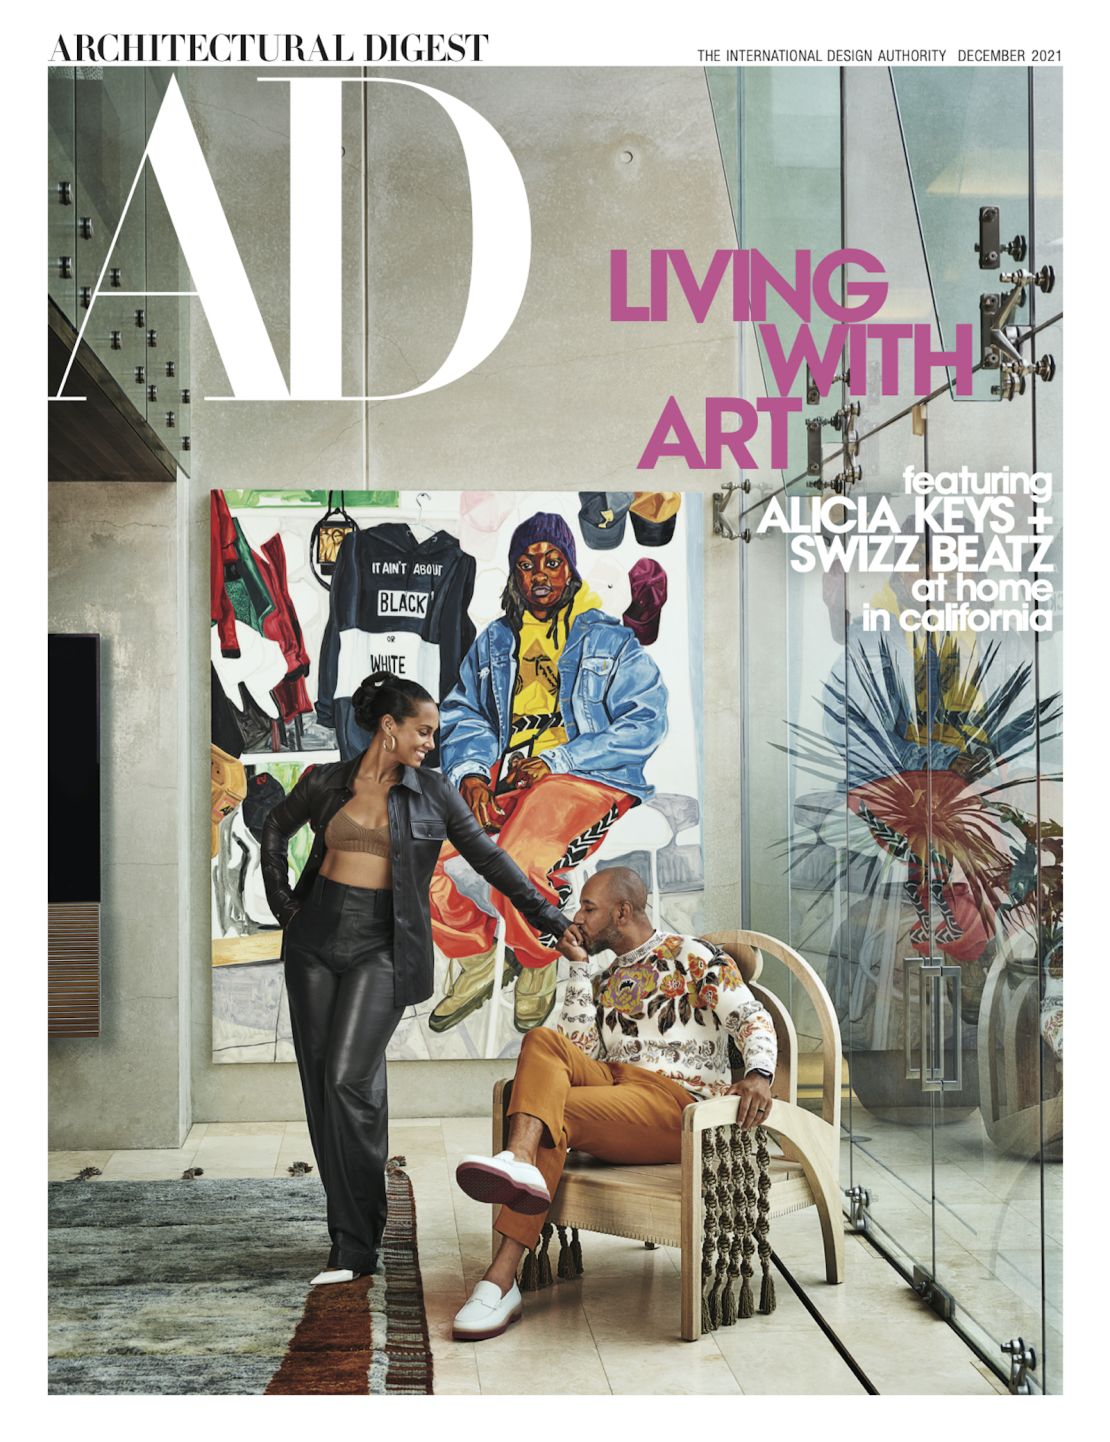 Alicia Keys and Swizz Beatz on the cover of Architectural Digest's forthcoming December issue.